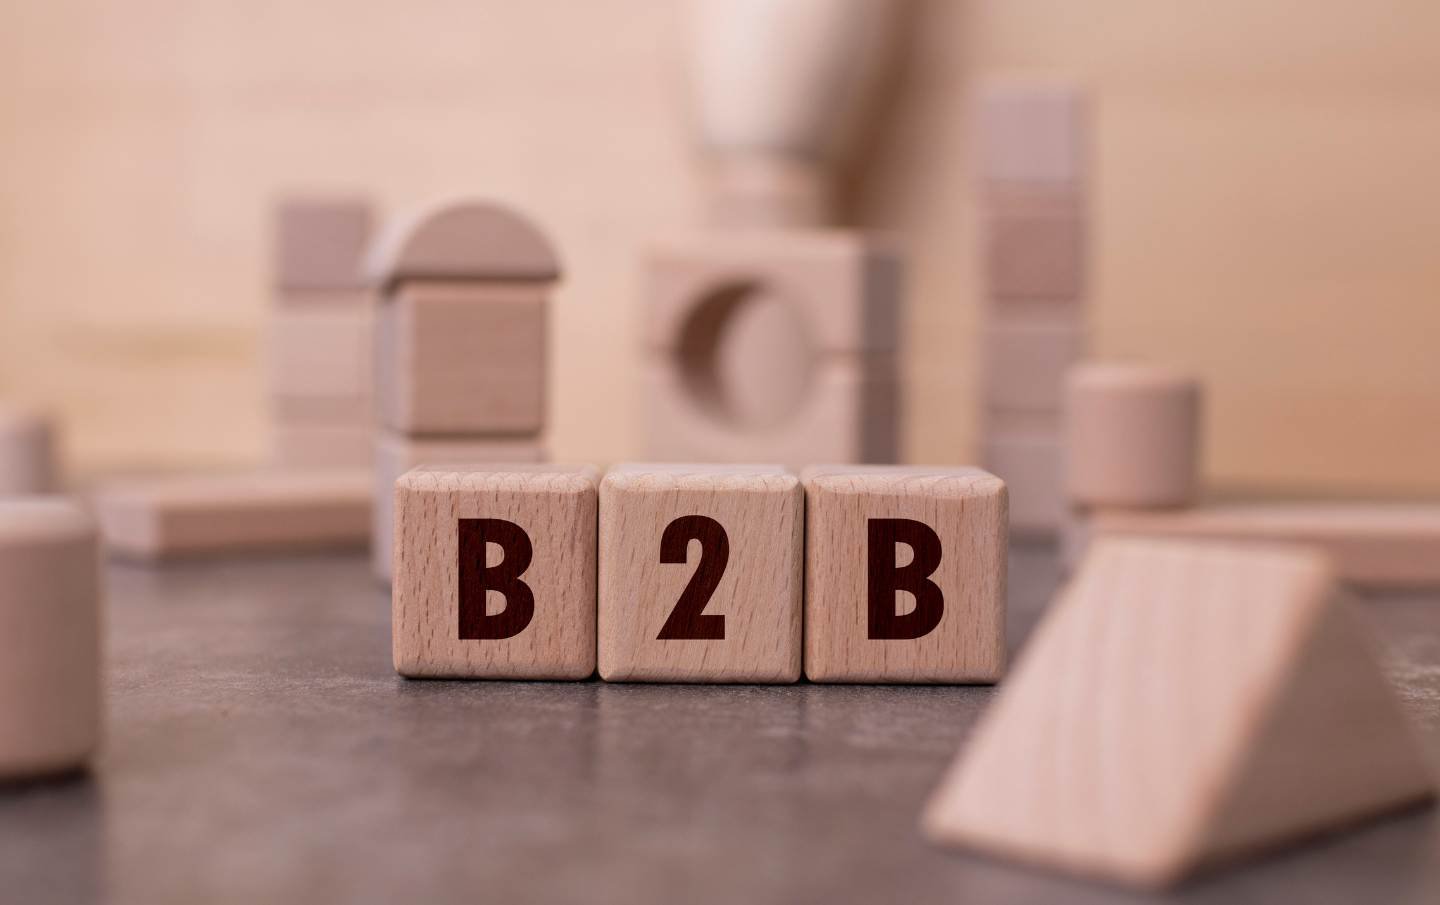 A set of three building blocks spelling out B 2 B that belong to a business owner who is driving sales to their business